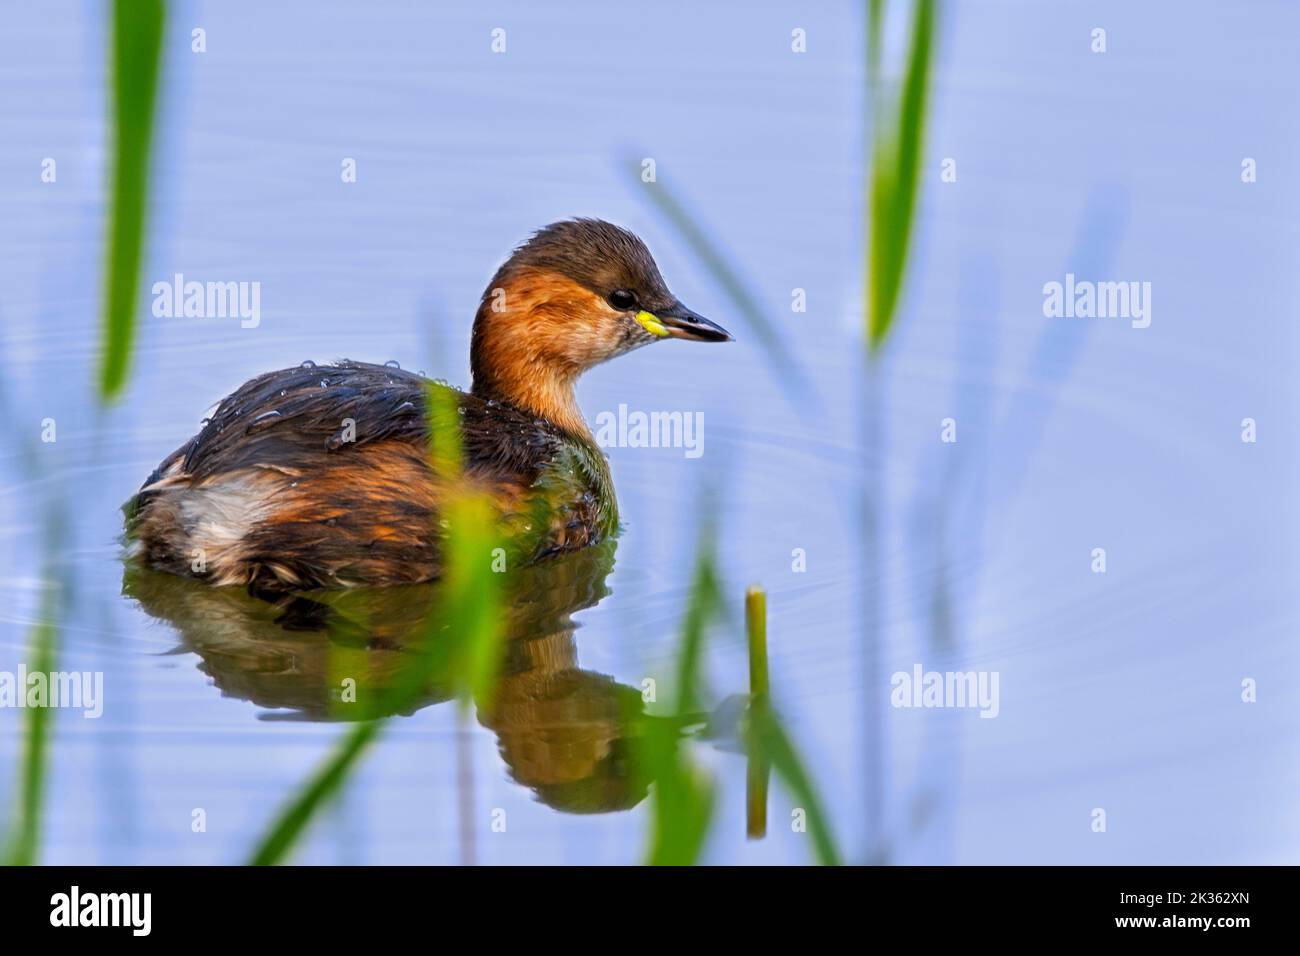 Little grebe / dabchick (Tachybaptus ruficollis / Podiceps ruficollis) in swimming in pond in early autumn / fall Stock Photo